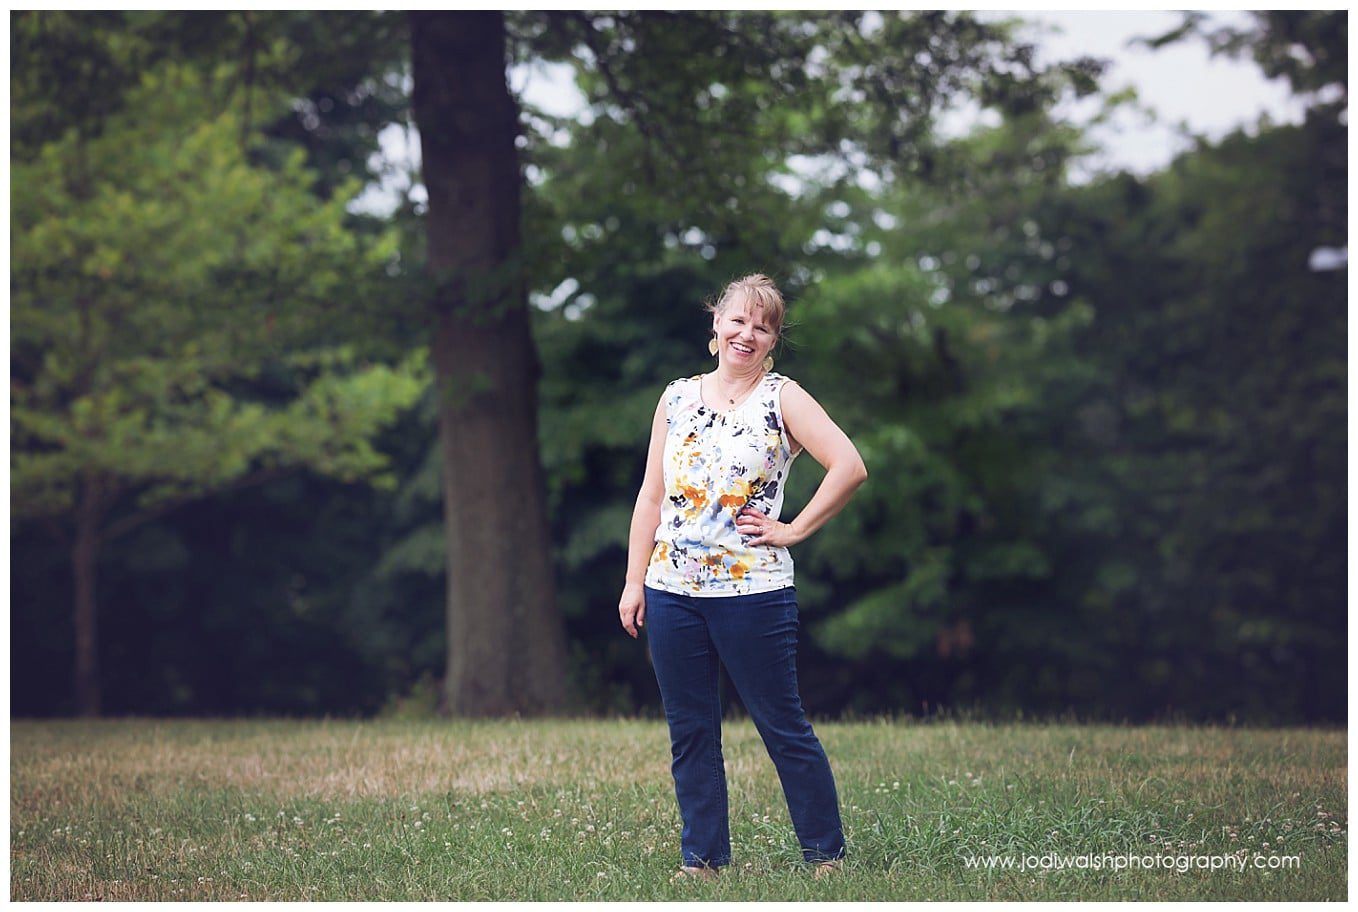 image of a woman in blue jeans and a sleeveless top standing in a grassy field with large trees behind her from a headshot session.